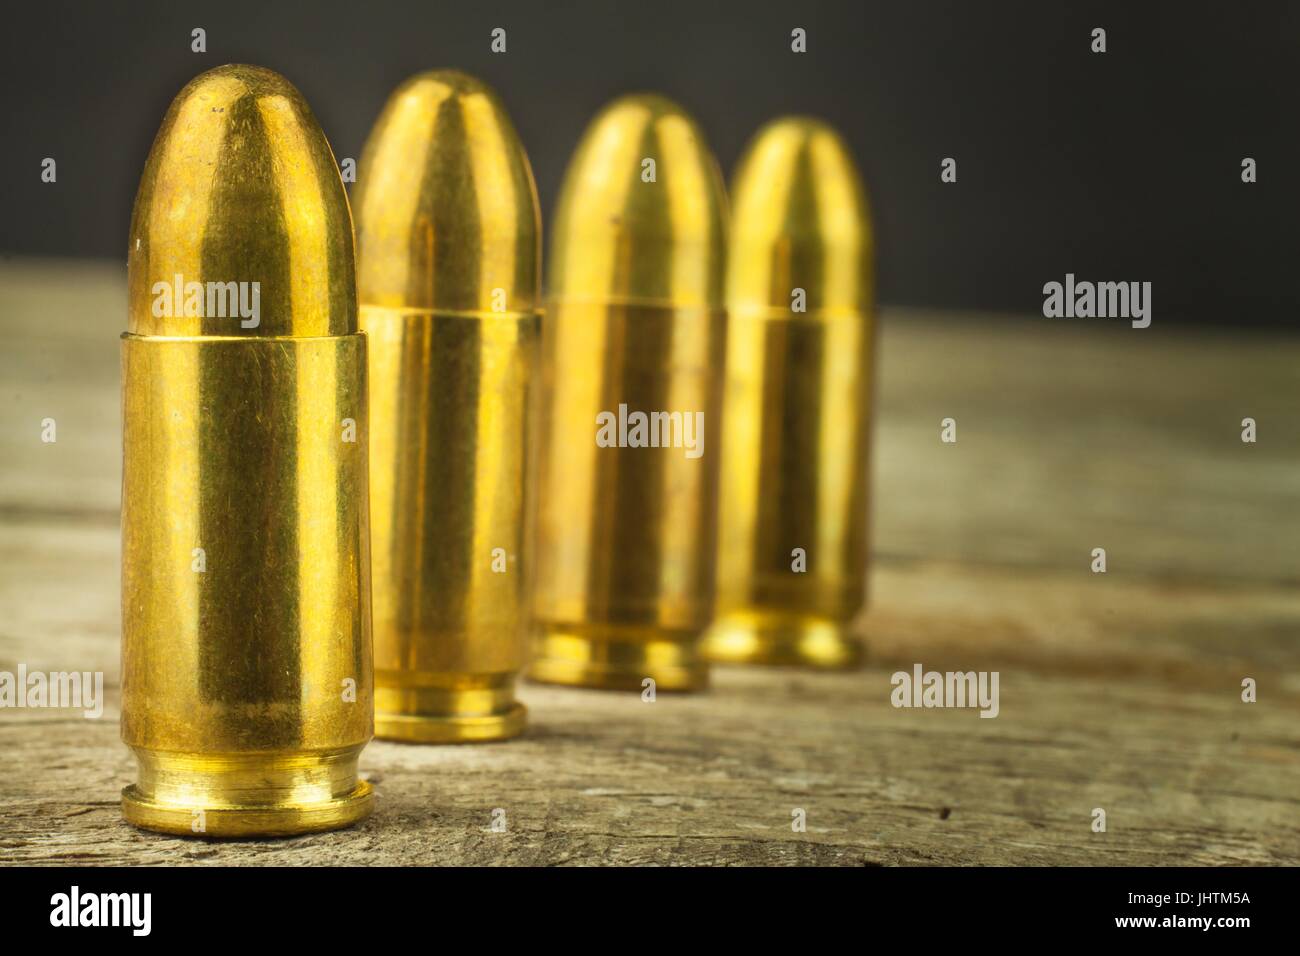 9mm Caliber Cartridges Sale Of Weapons And Ammunition The Right To Bear Arms Stock Photo Alamy